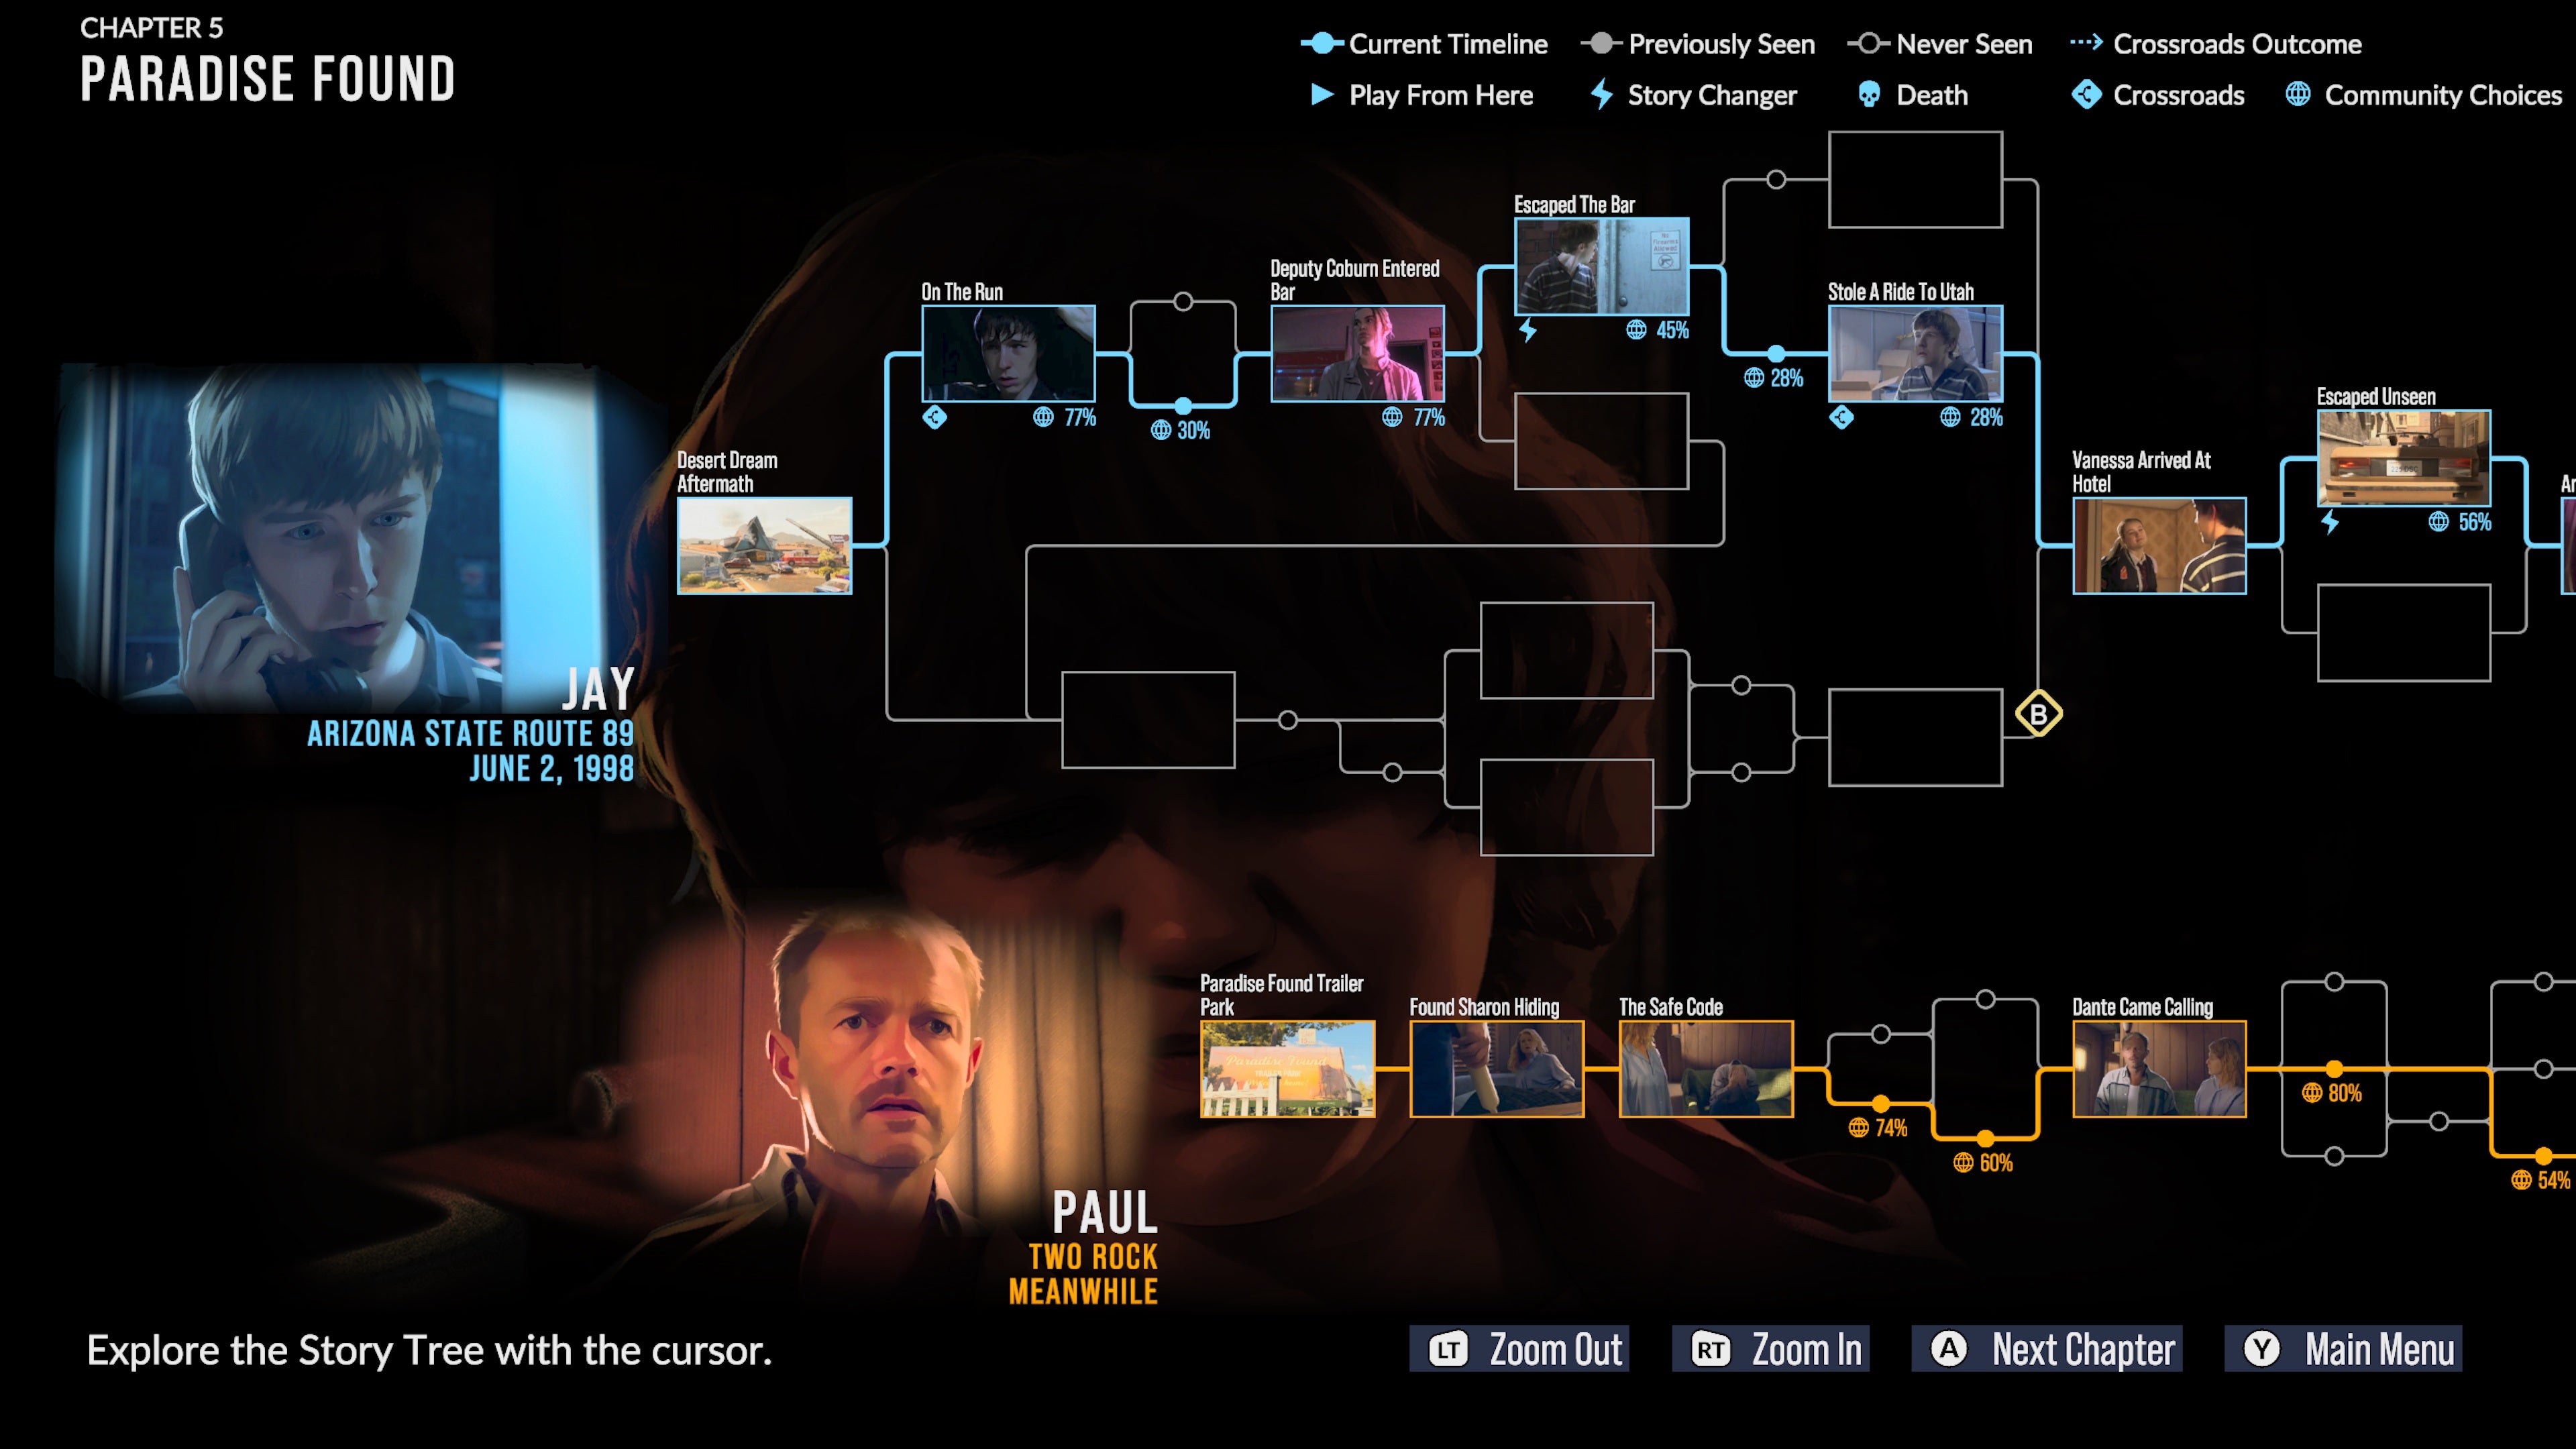 The choice and consequences flow chart at the end of the As Dusk Falls chapter.